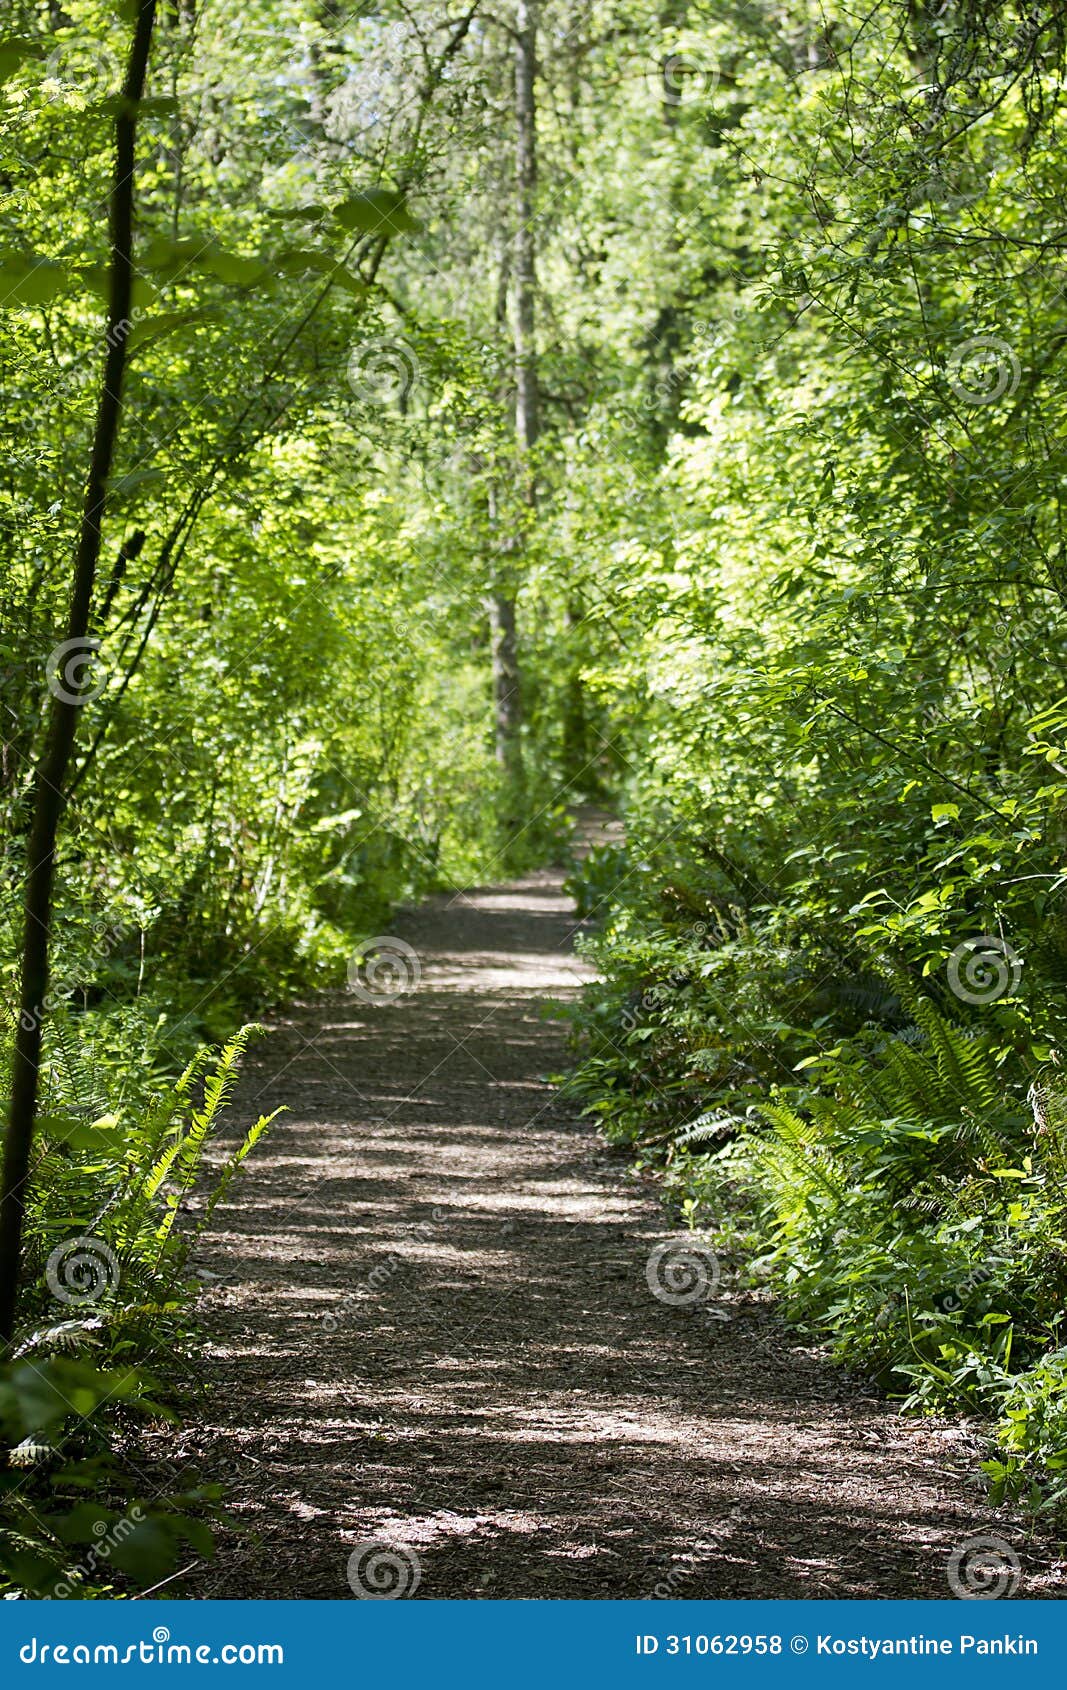 Walking Trail In The Woods Royalty Free Stock Photos ...